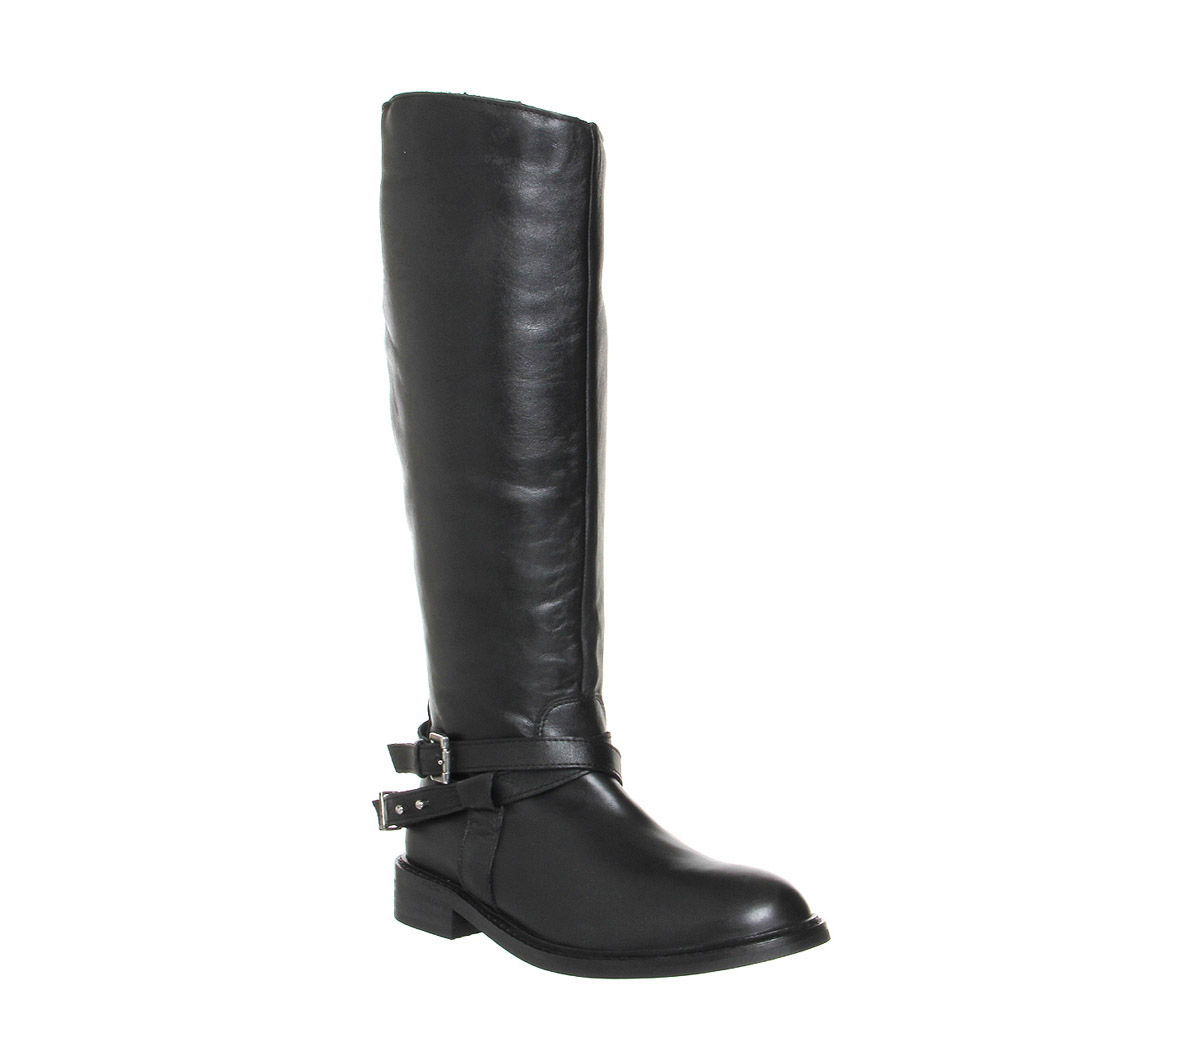 OFFICENighthorse Strap Knee bootsBlack Leather